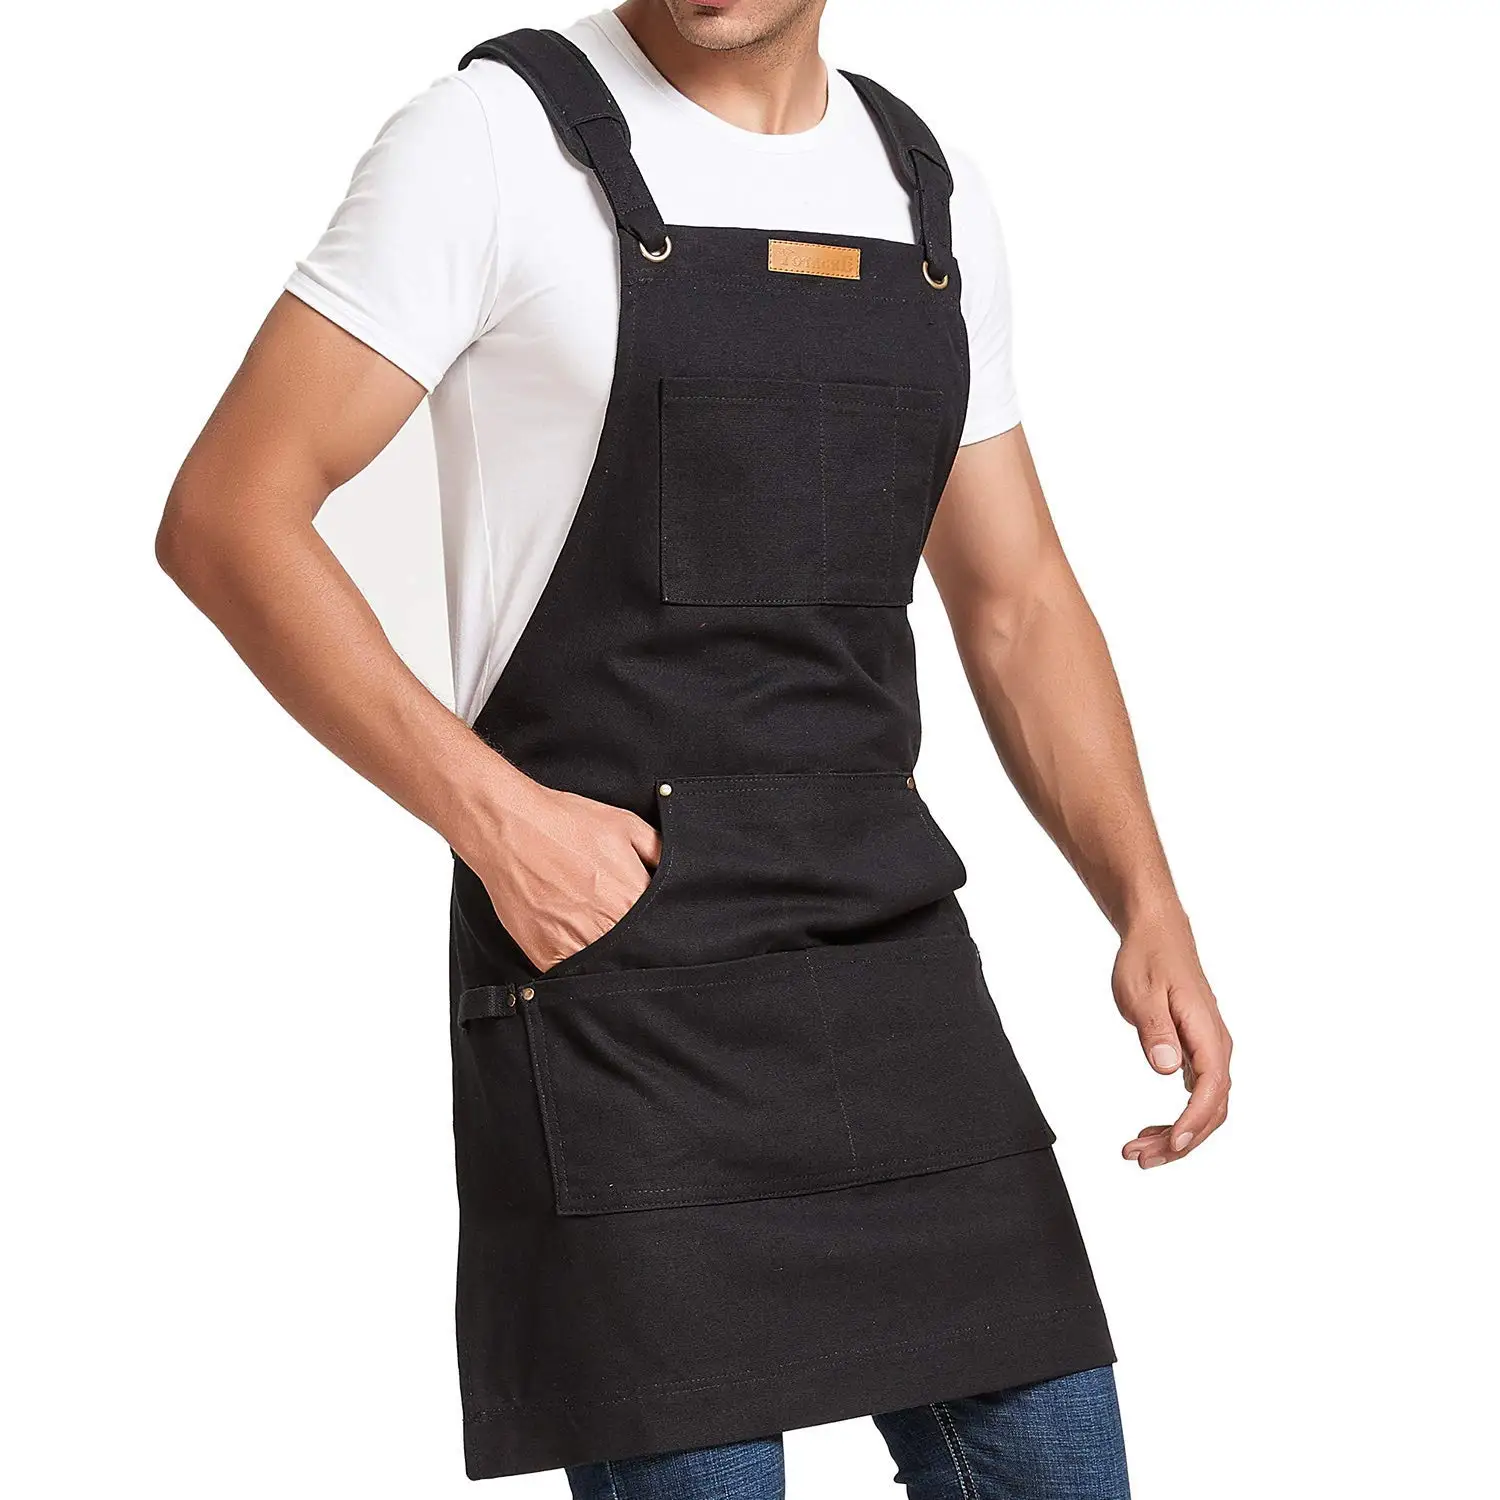 Pushing black gay af kitchen aprons and more gay pride month